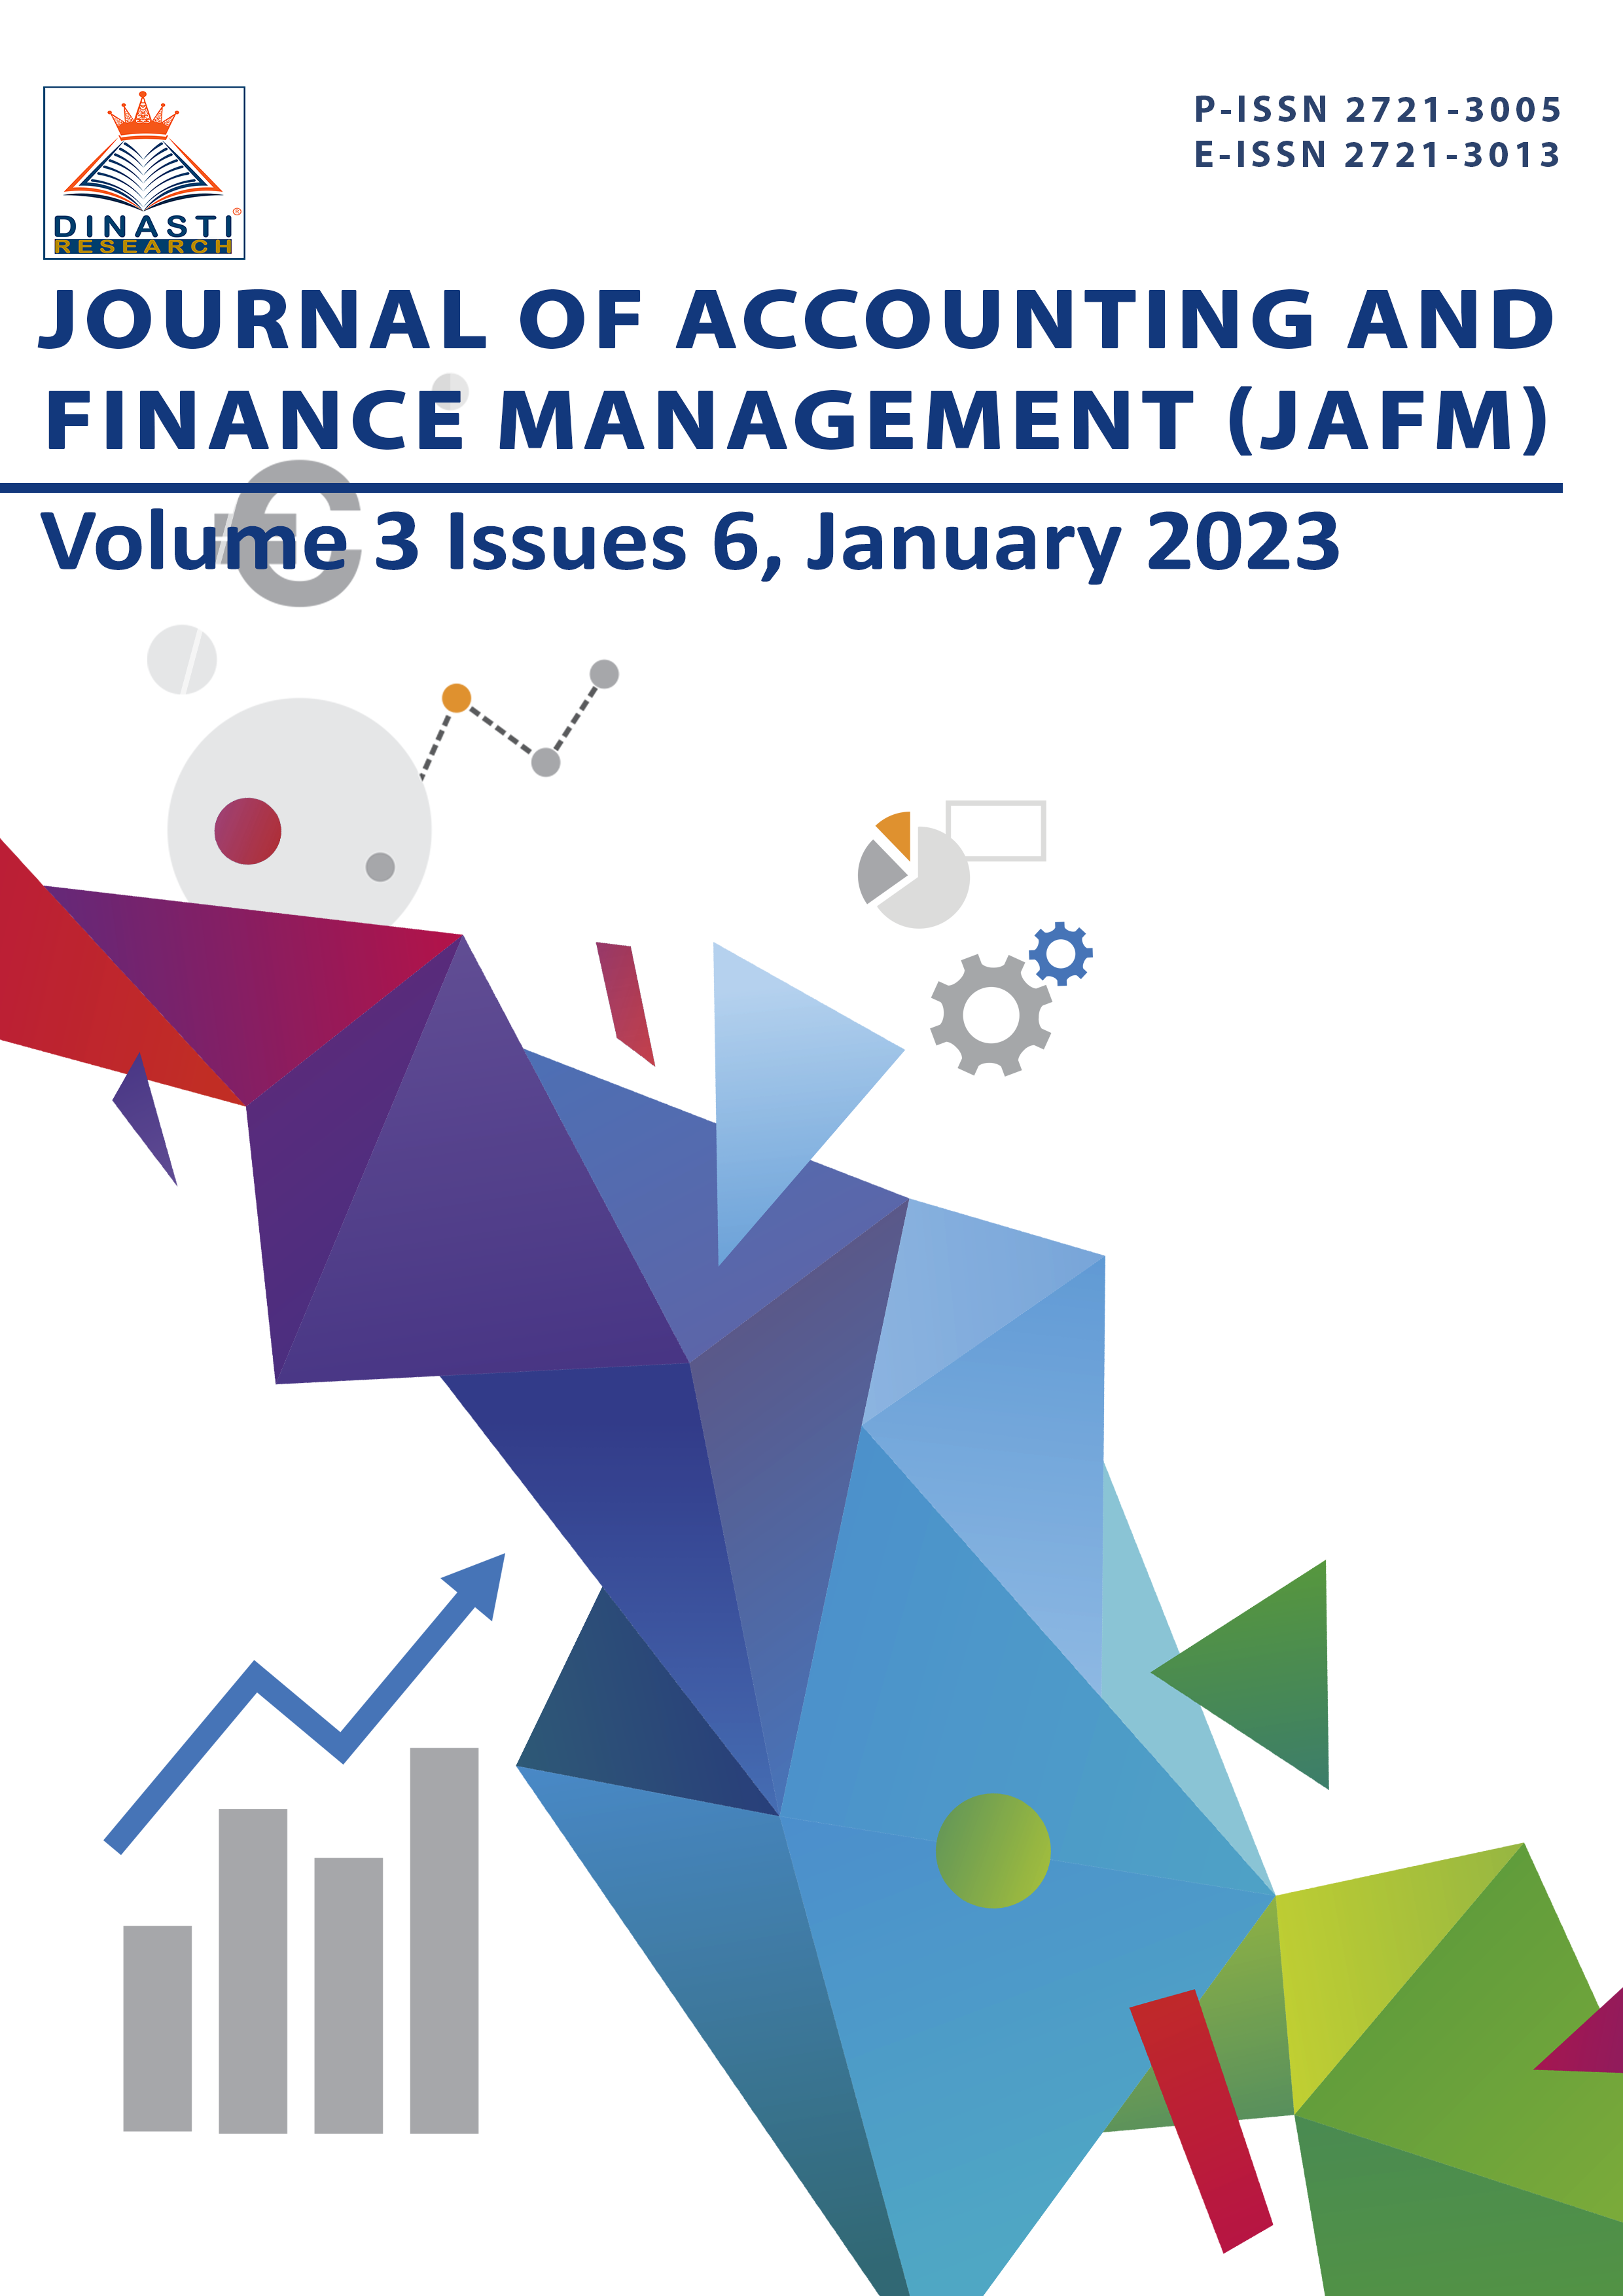 					View Vol. 3 No. 6 (2023): Journal of Accounting and Finance Management (January - February 2023)
				